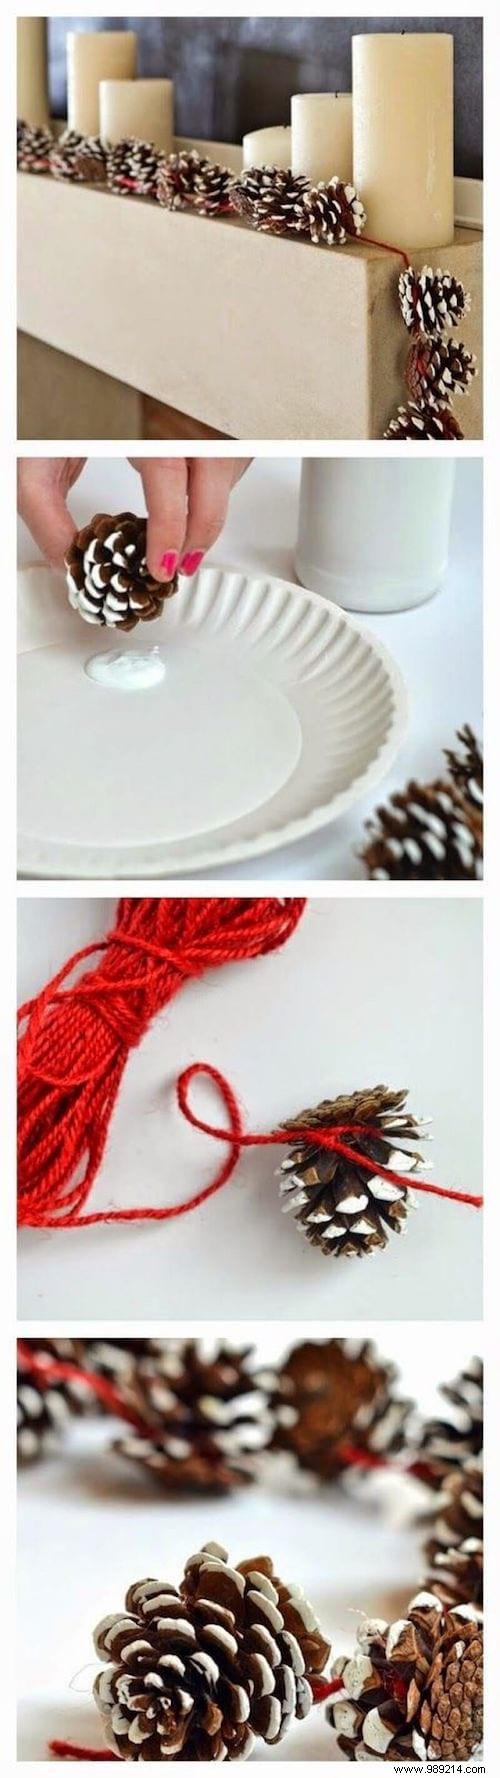 25 Super Christmas Decoration Ideas With Pine Cones (Easy And Cheap). 